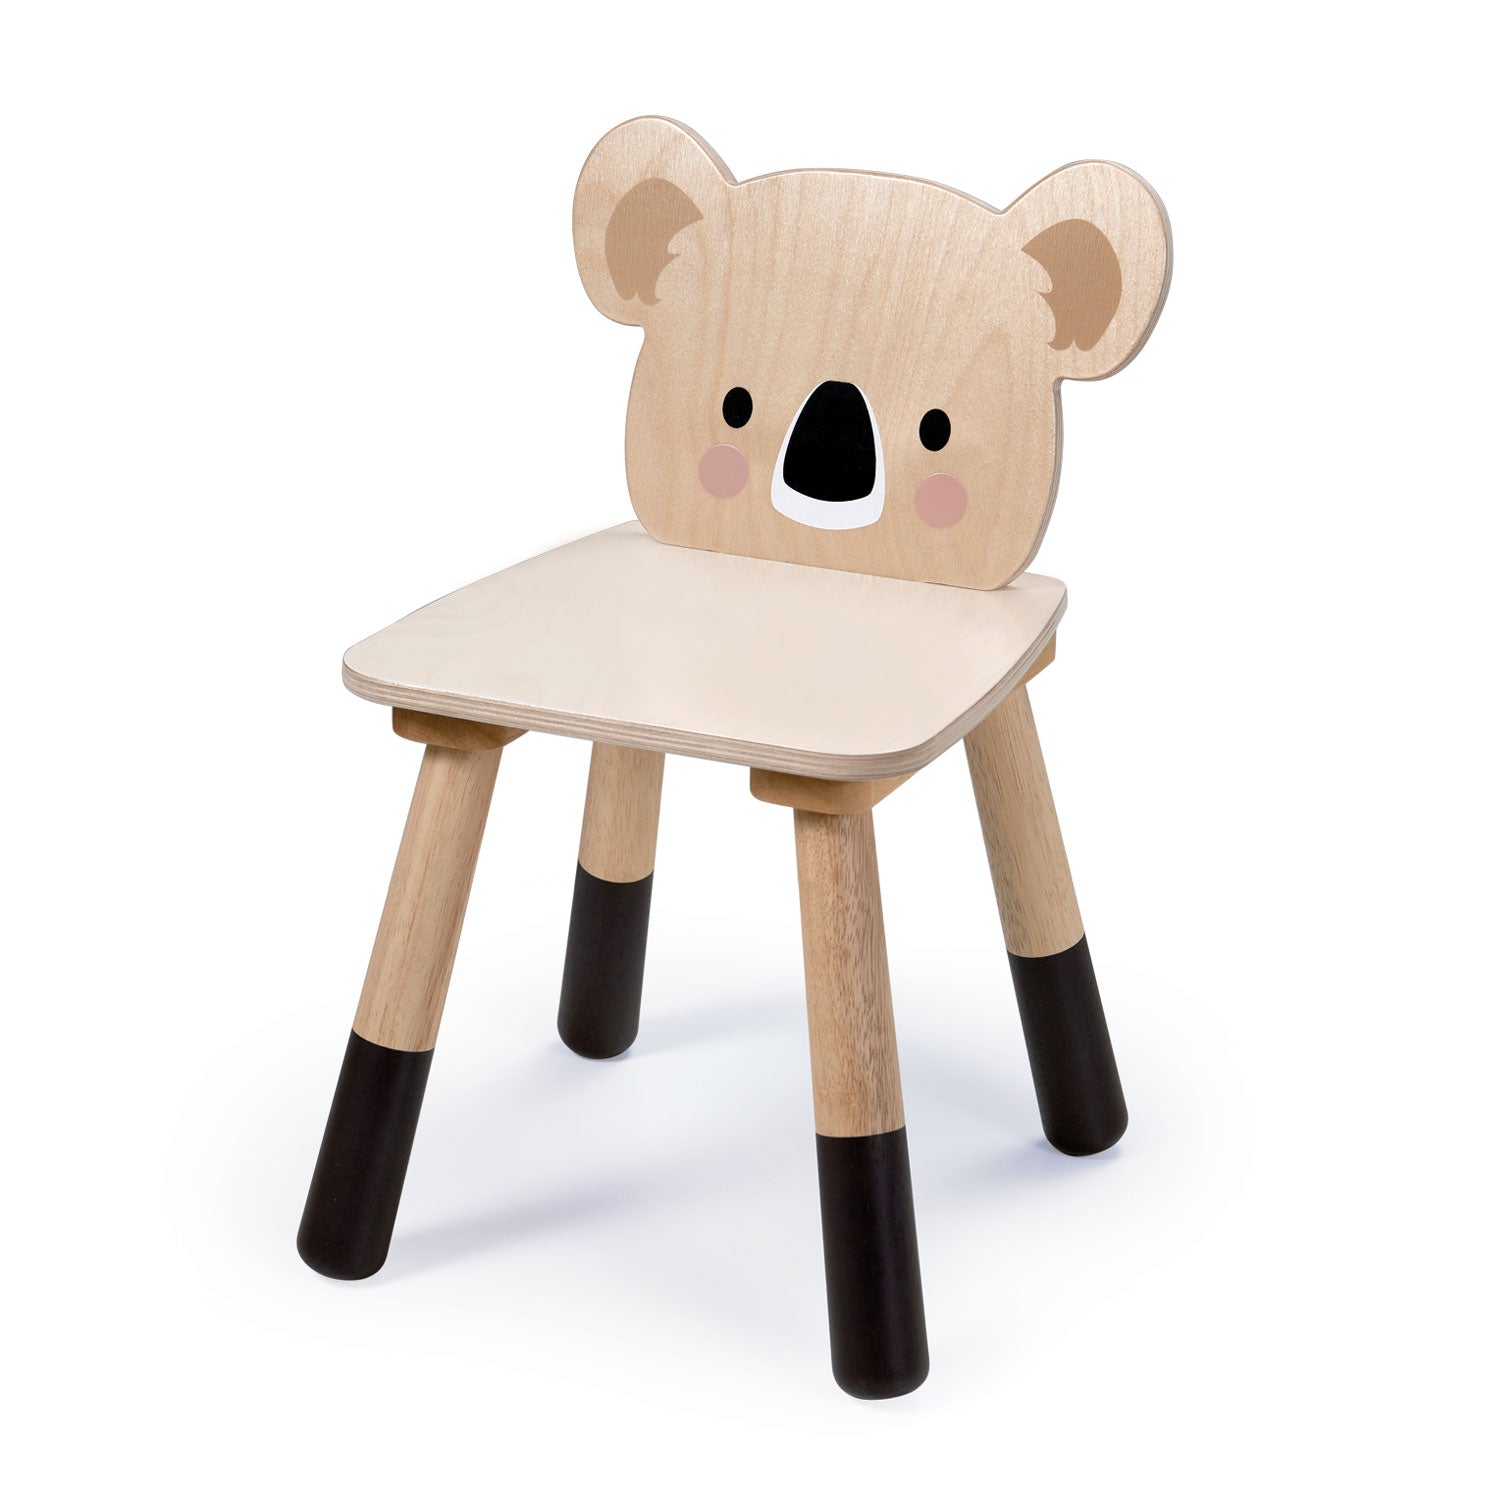 <p>A stylish koala chair made from top quality plywood.</p>
<p>Age range: 3 Years and Older  </p>
<p> Product size: 11.42 x 11.81 x 18.31”  </p>
<p>Seat height: 10.7&quot;  </p>
<p> Weight: 4.71 lbs  </p>
<p>Weight limit: 30 kgs </p>
<p><strong>Self assembly required.</strong></p>
